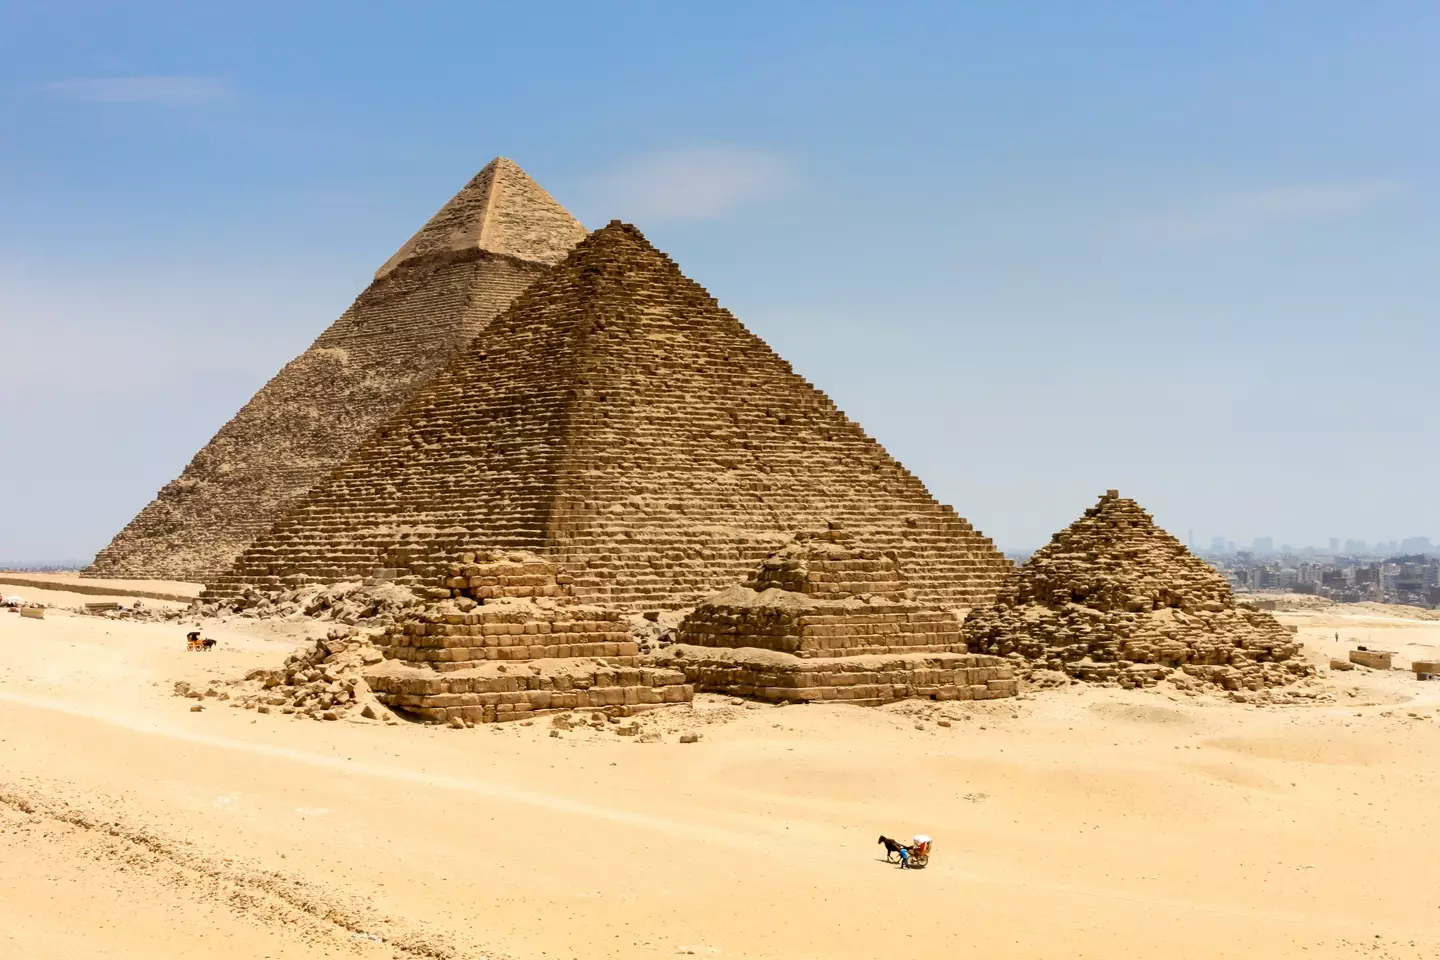 The Egyptian pyramids are a hugely famous tourist spot.